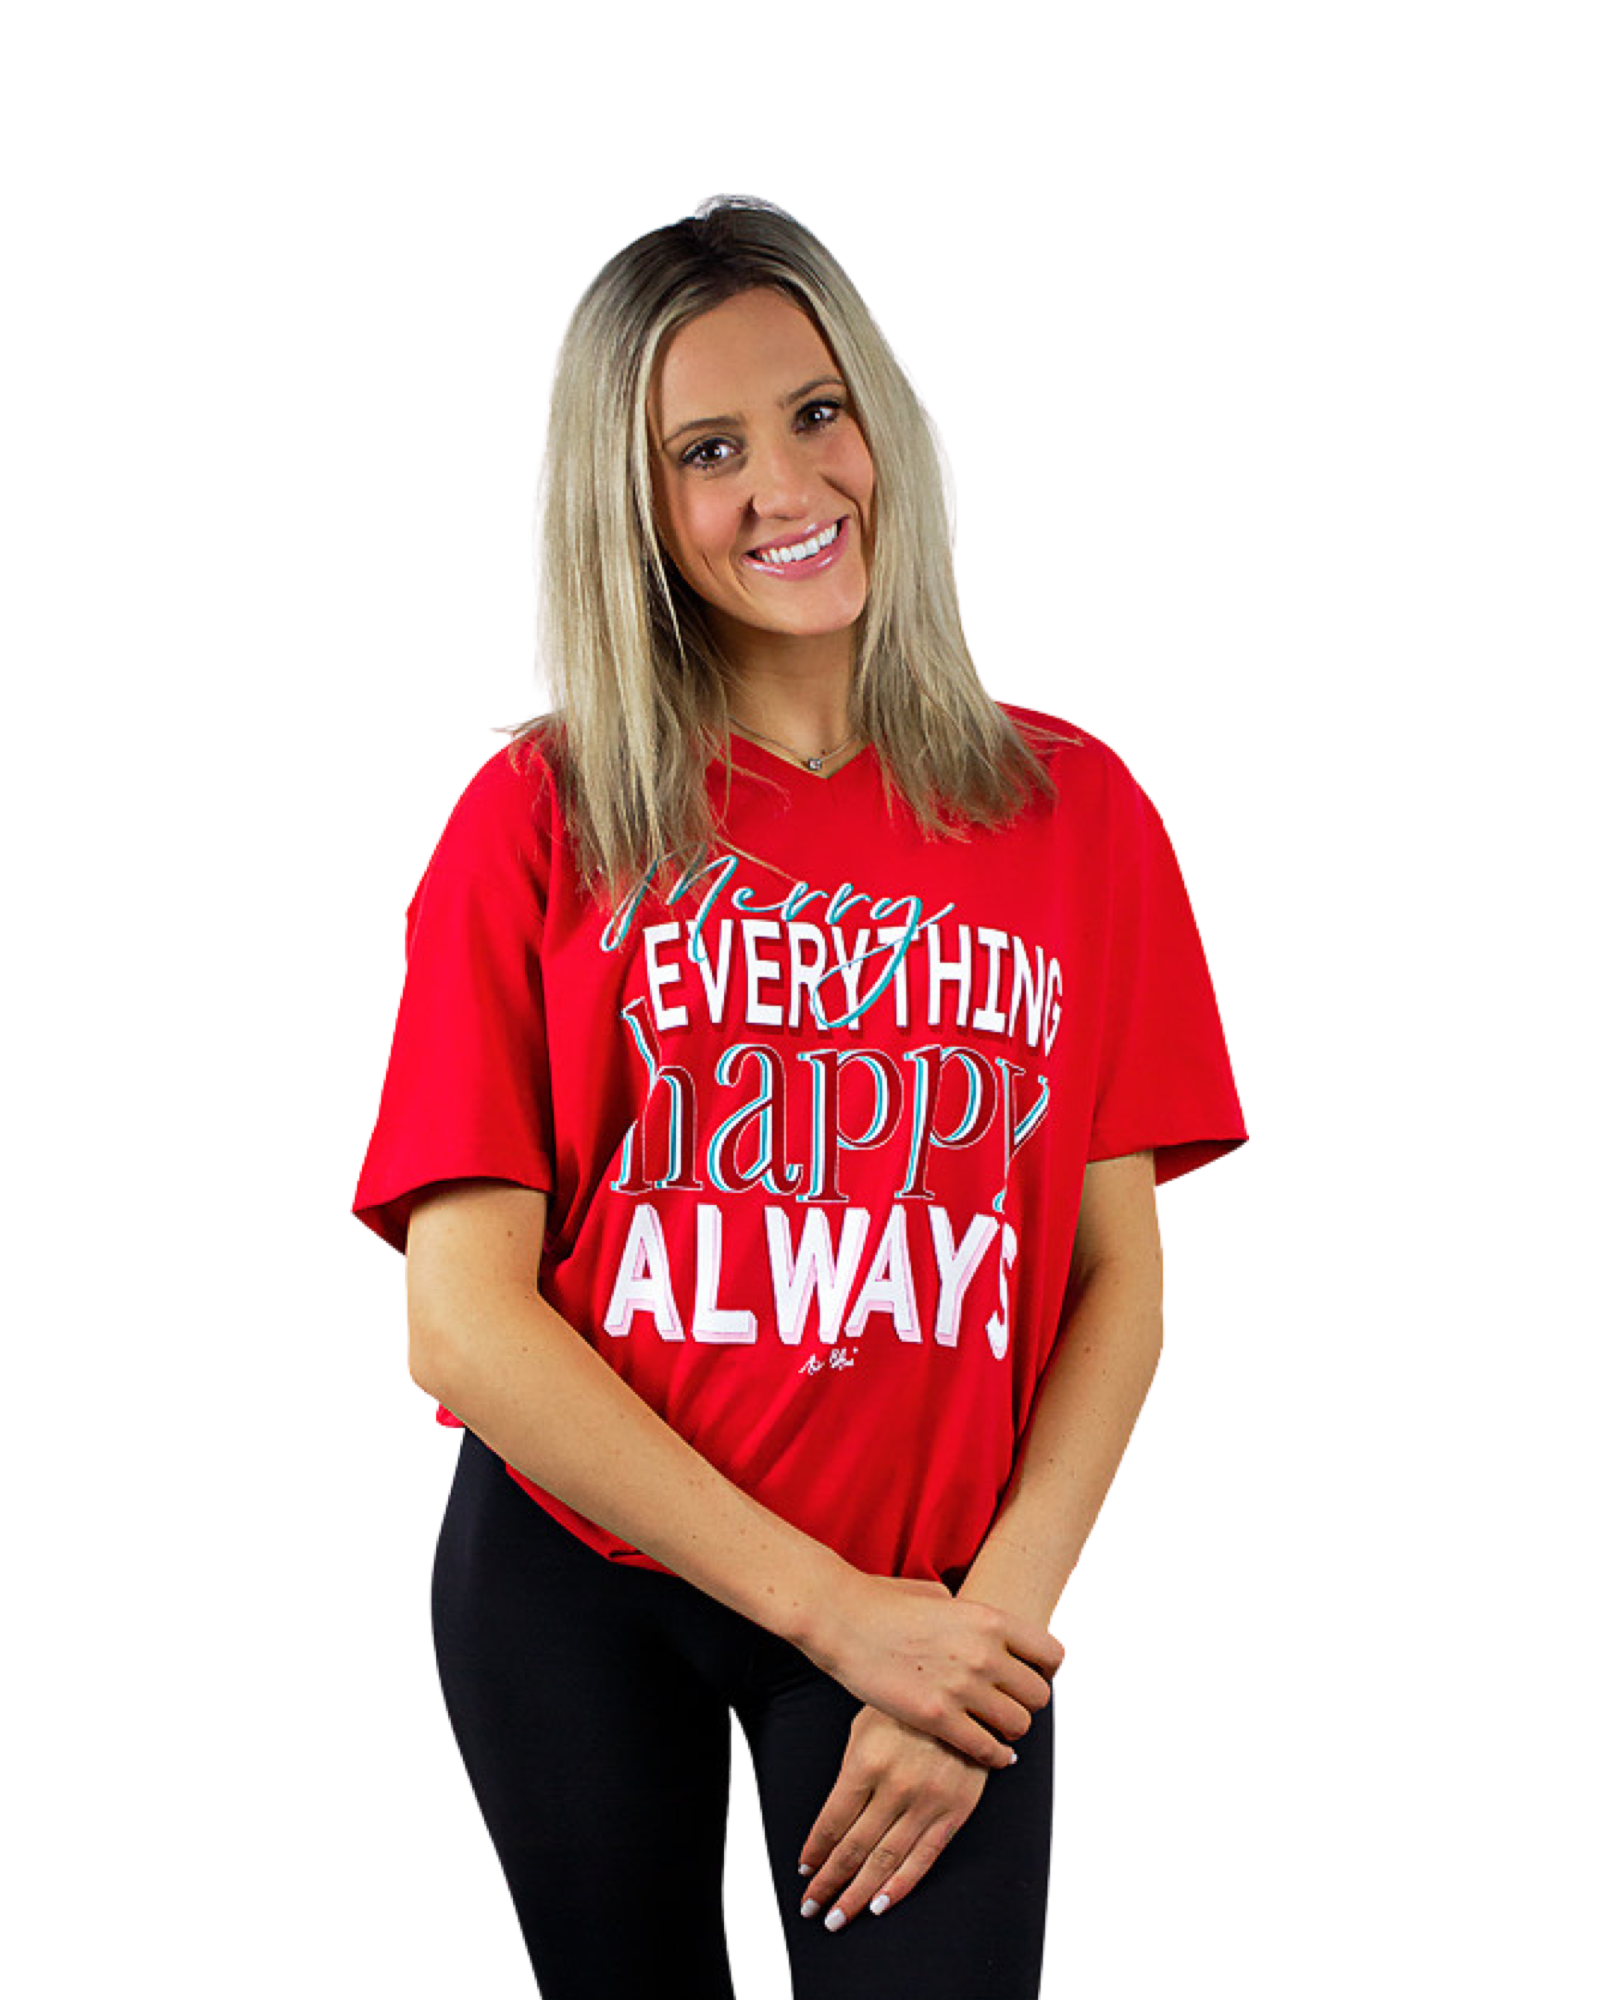 Merry Everything, Happy Always - Red Sueded V-Neck 